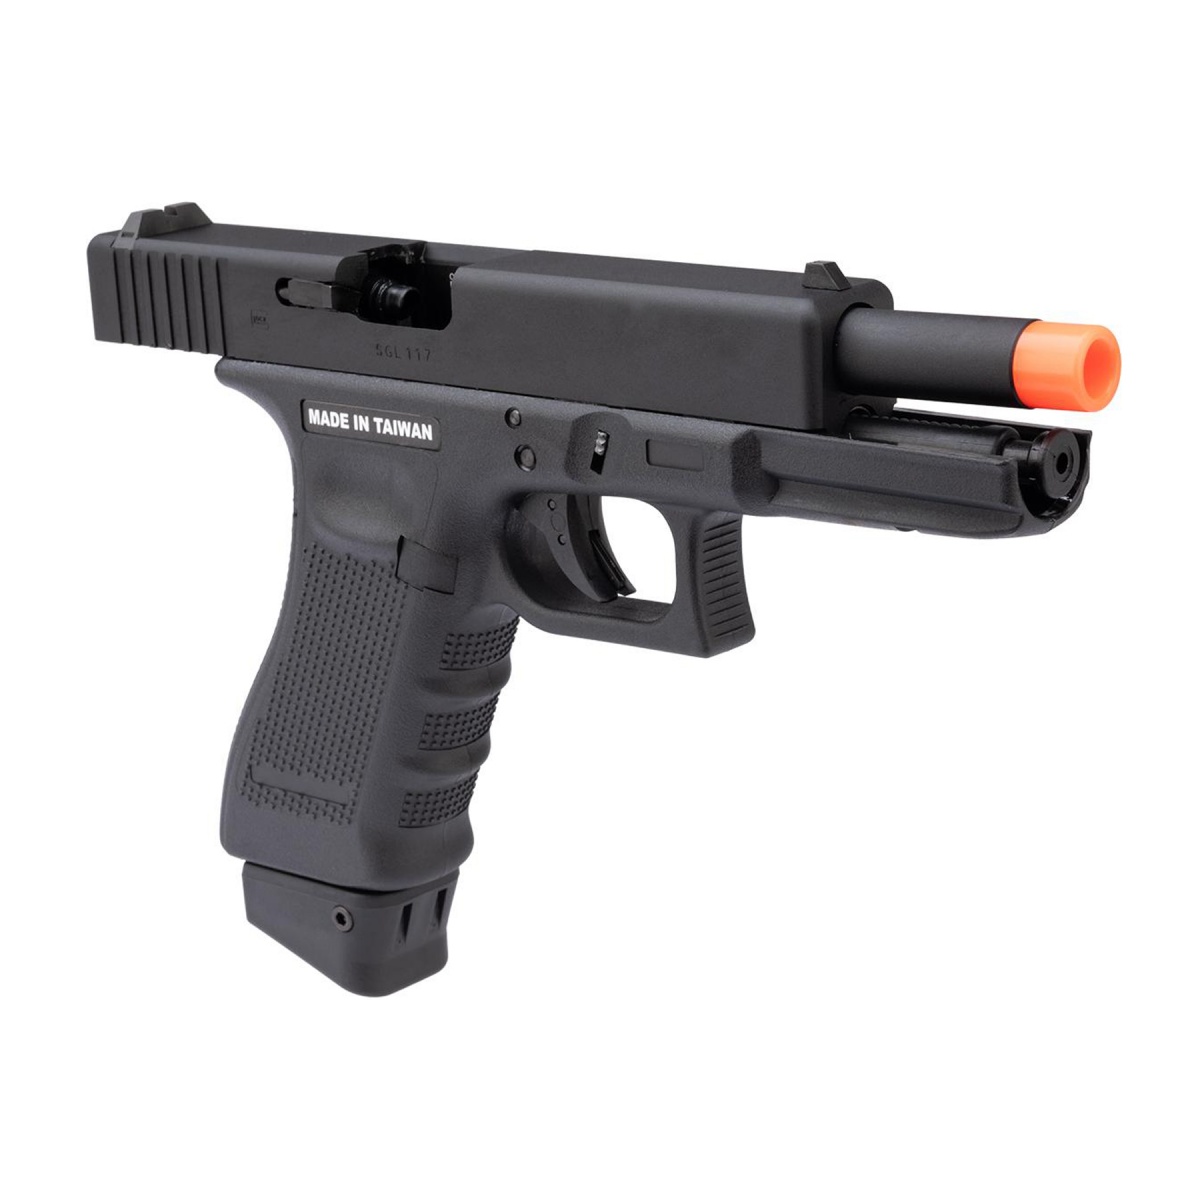 Spartan / Cybergun Licensed GLOCK 17 Gen 4 CO2 Gas Blowback Airsoft Pistol  - LE / Military ONLY (Package: Gun Only), Airsoft Guns, Gas Airsoft Pistols  -  Airsoft Superstore